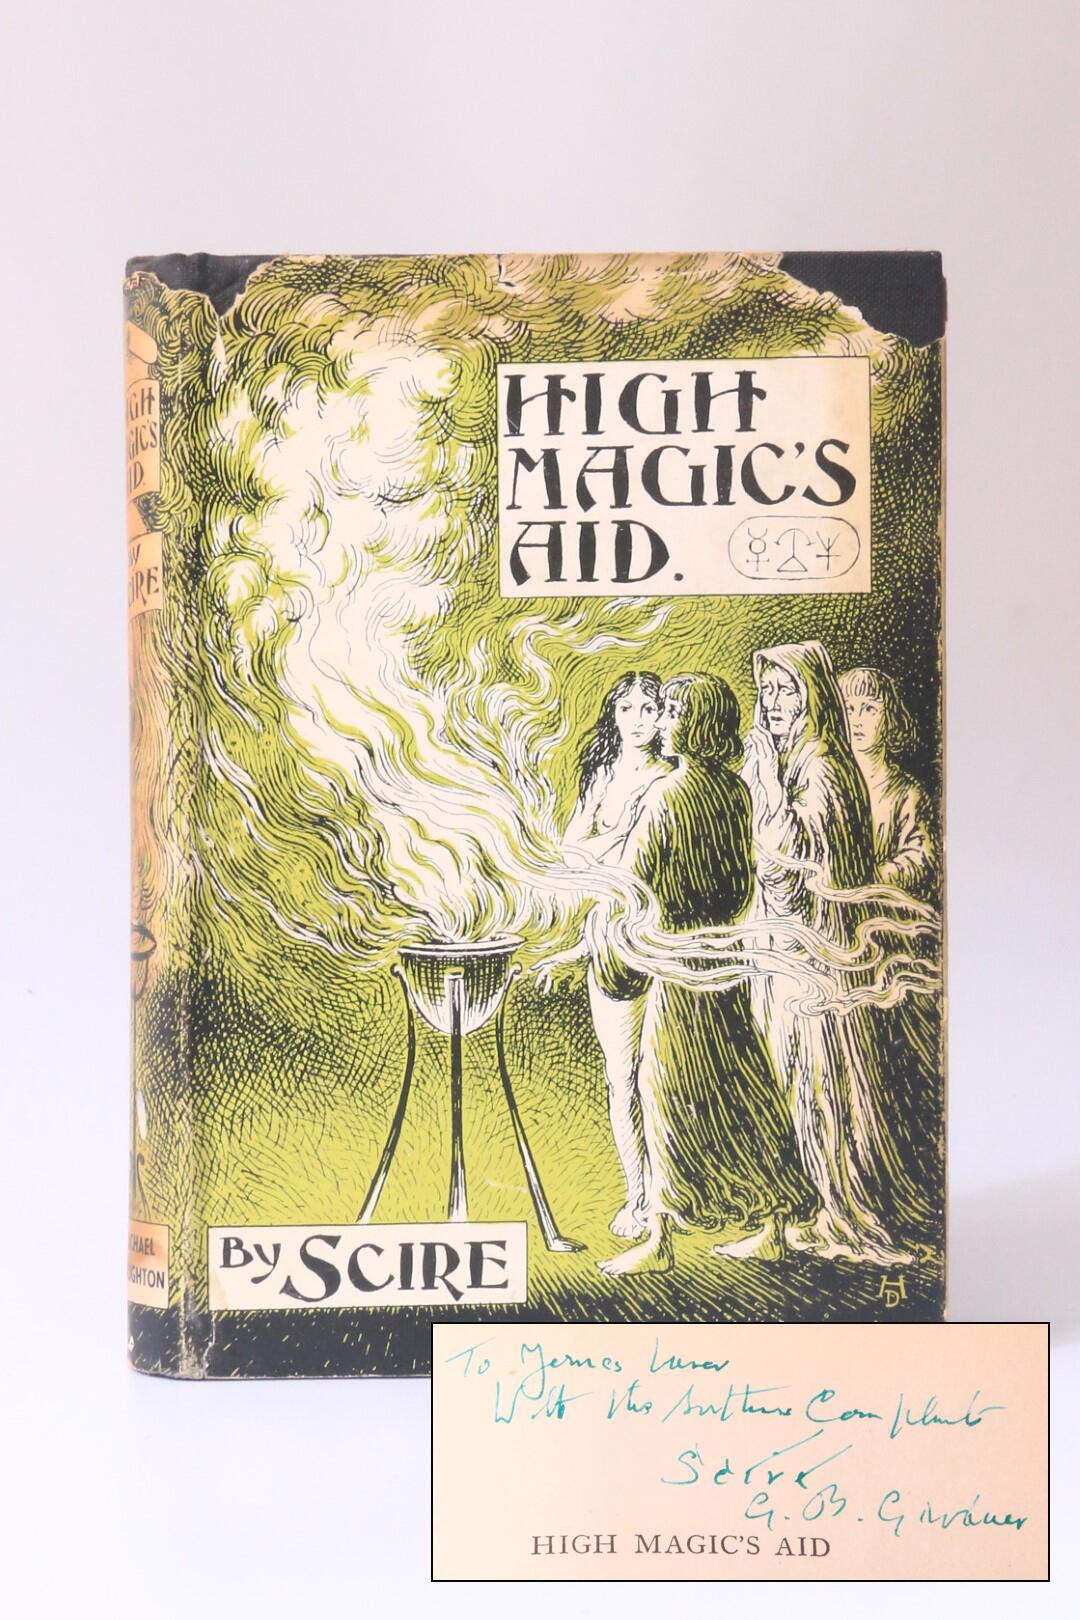 Scire [Gerald B. Gardner] - High Magic's Aid - Michael Houghton, 1949, Signed First Edition.